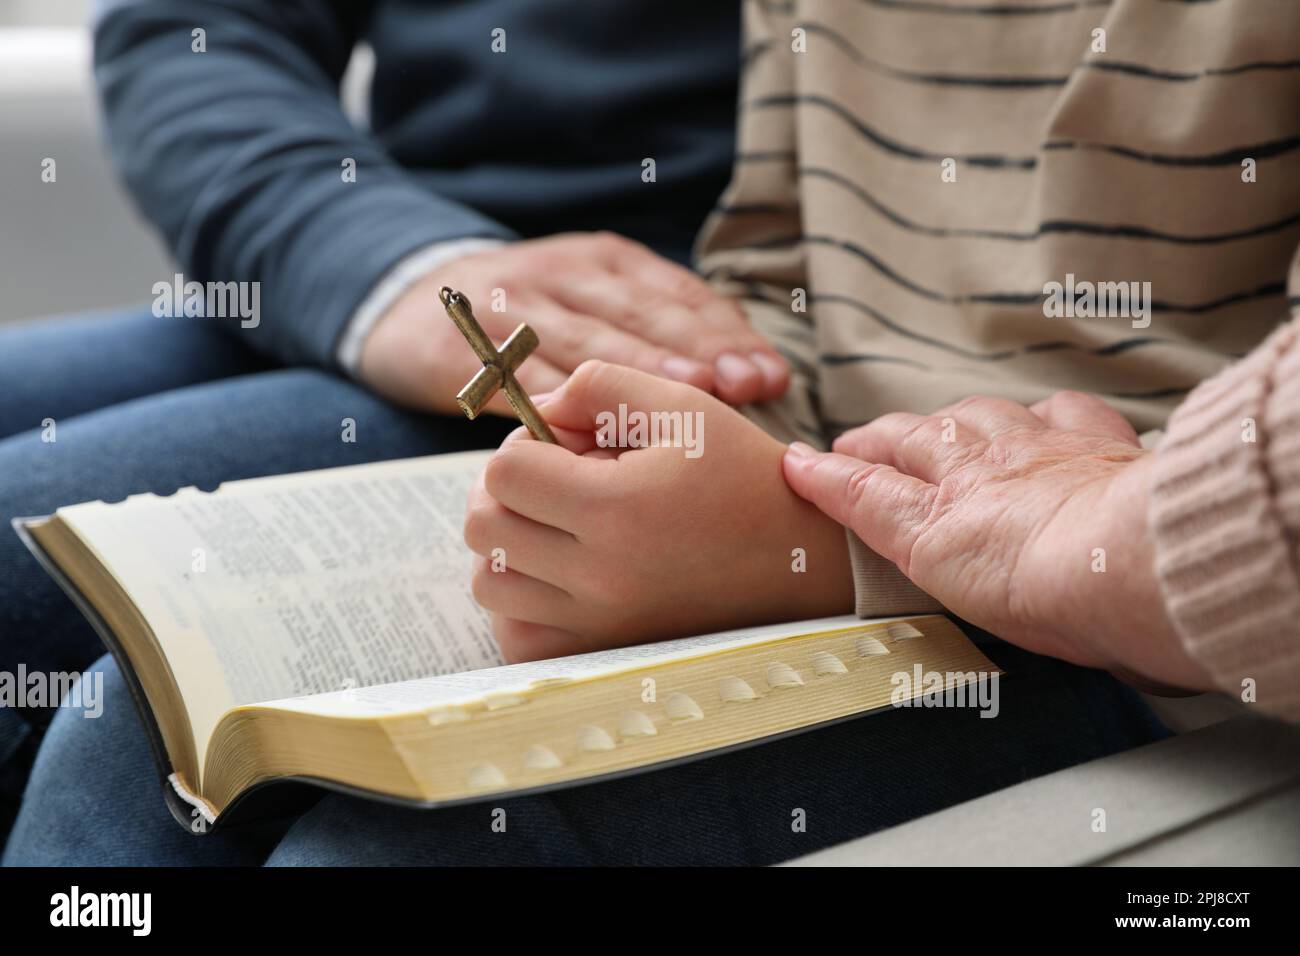 Boy and his godparents praying together, closeup Stock Photo